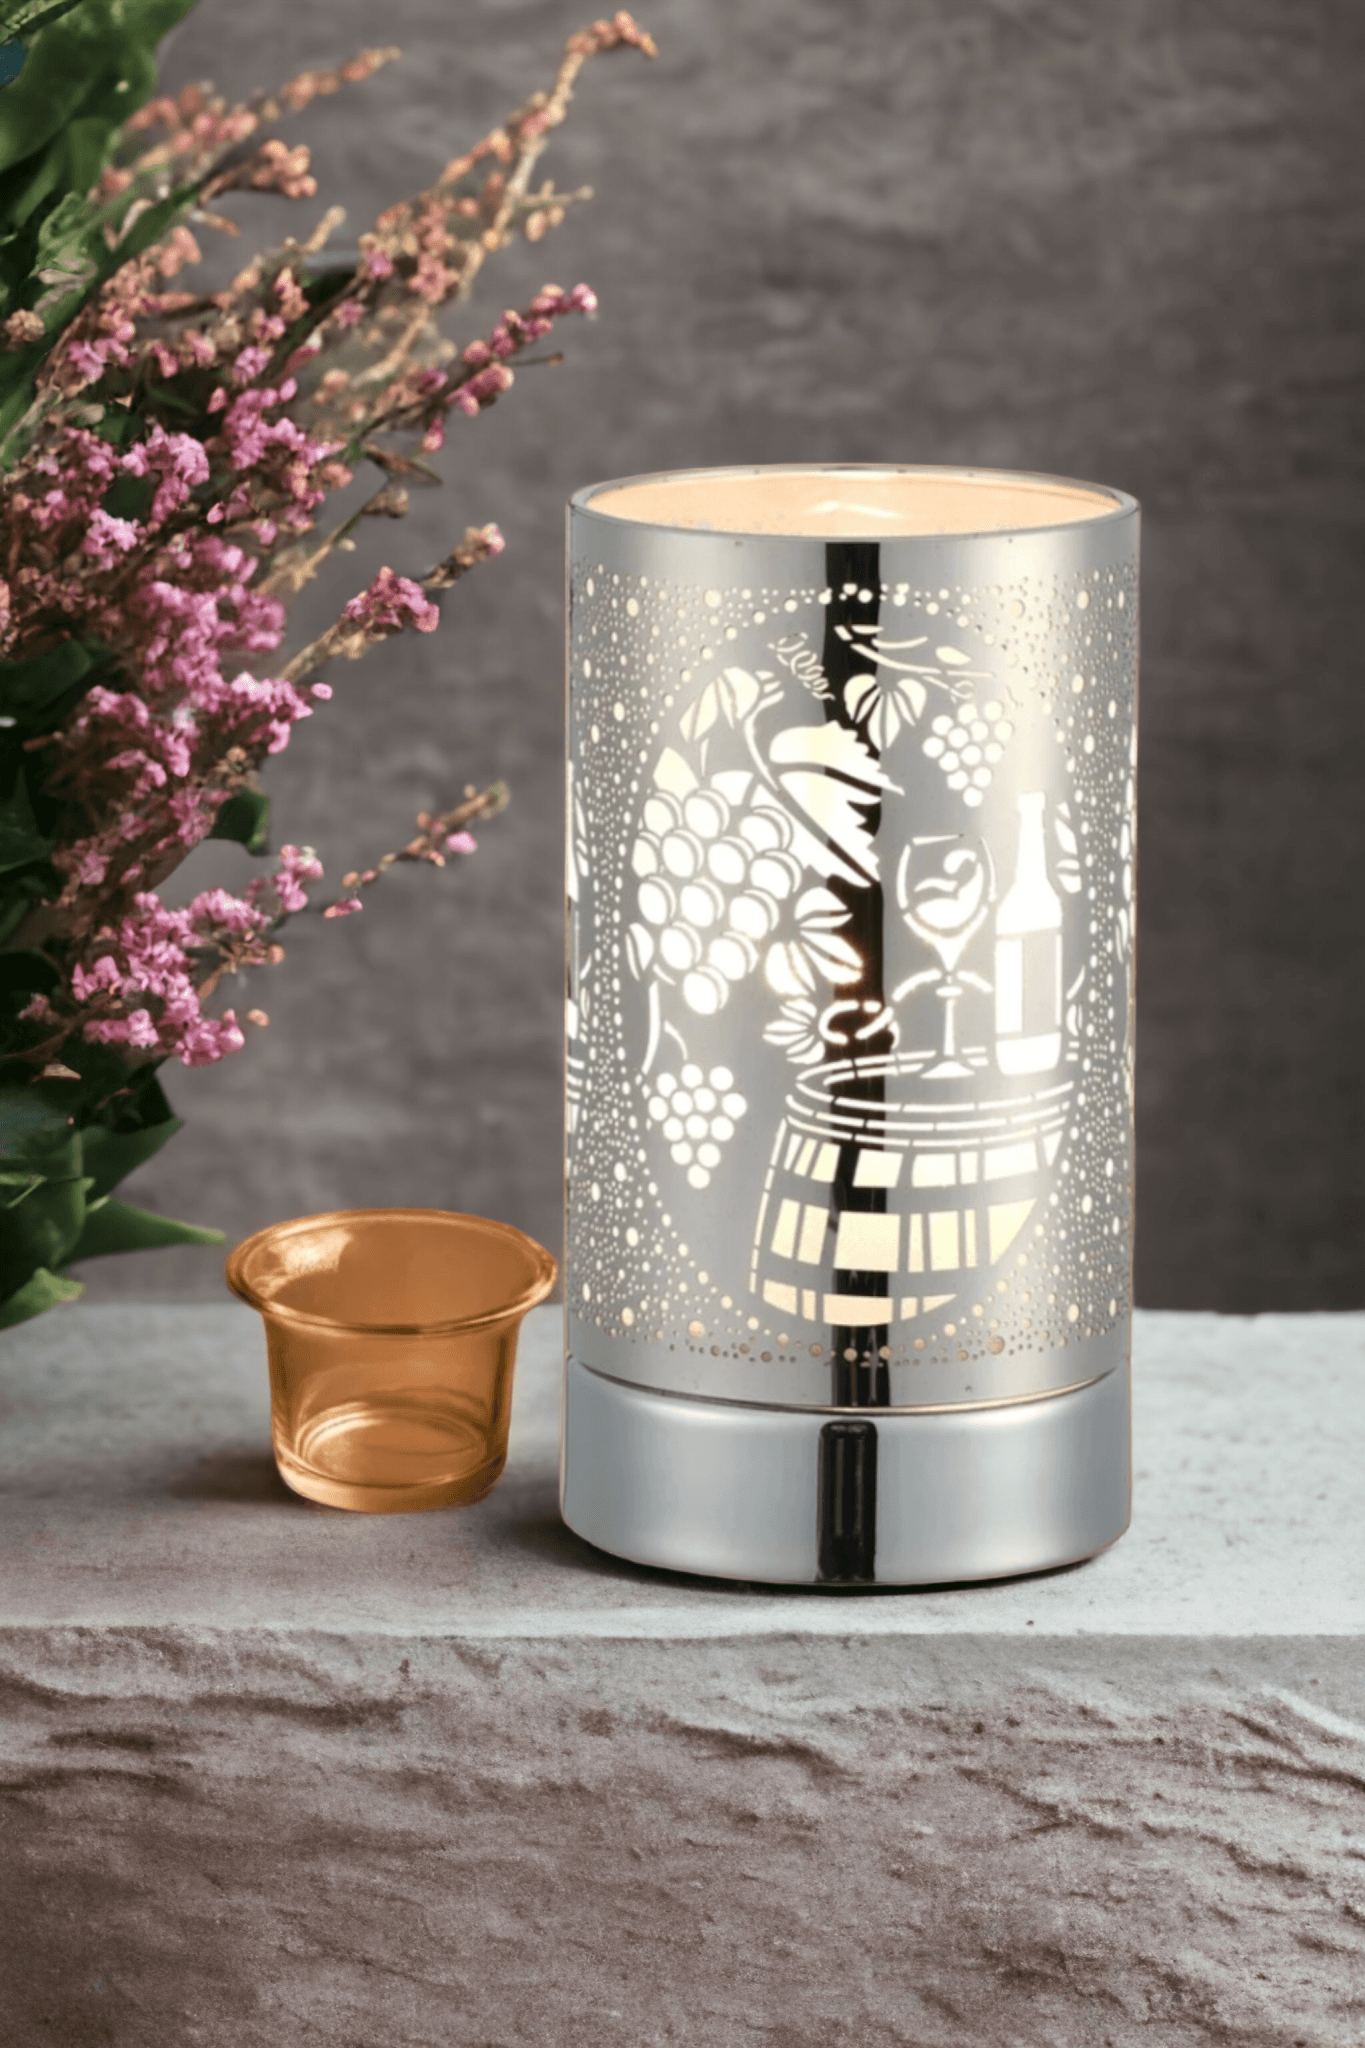 Wine Time Touch Lamp Warmer (Silver) - WaxettyWine Time Touch Lamp Warmer (Silver)Wax Warmer